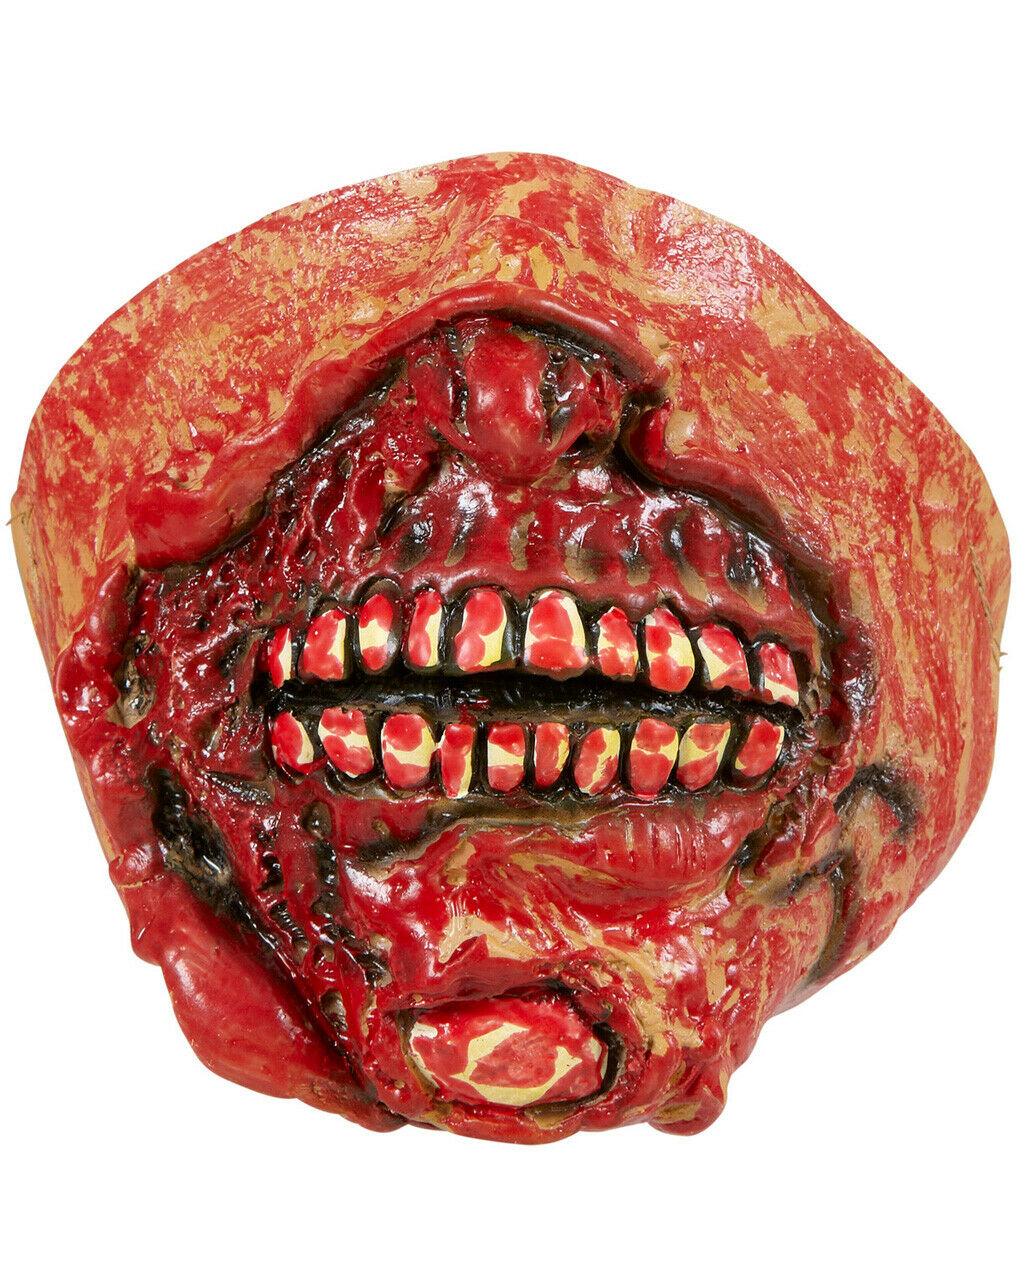 ZOMBIE MOUTH MASK